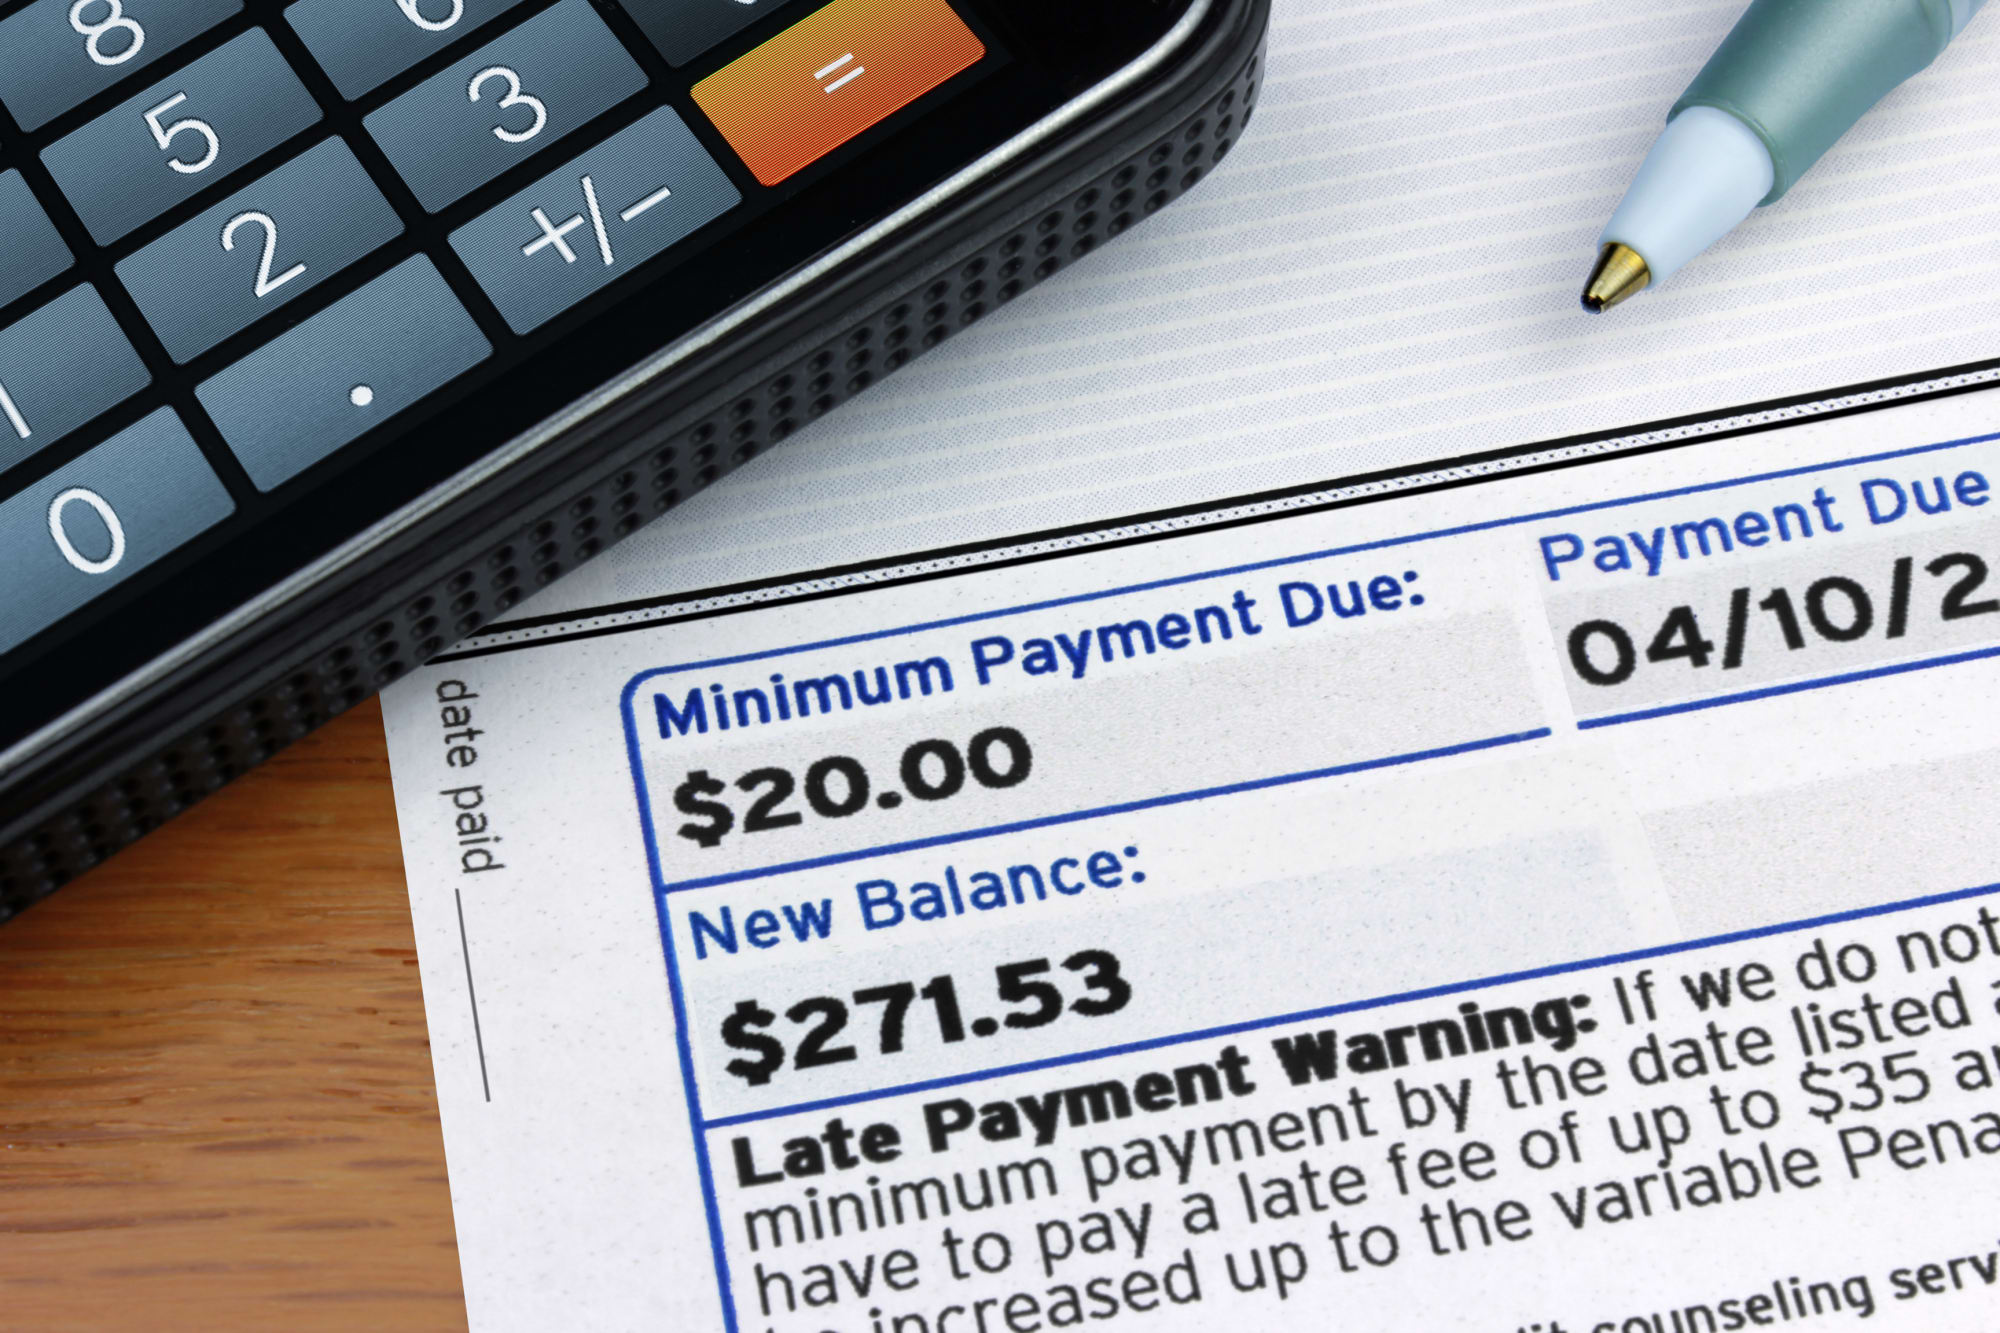 4 Reasons Making Just Minimum Payments Is Bad, and How to ...